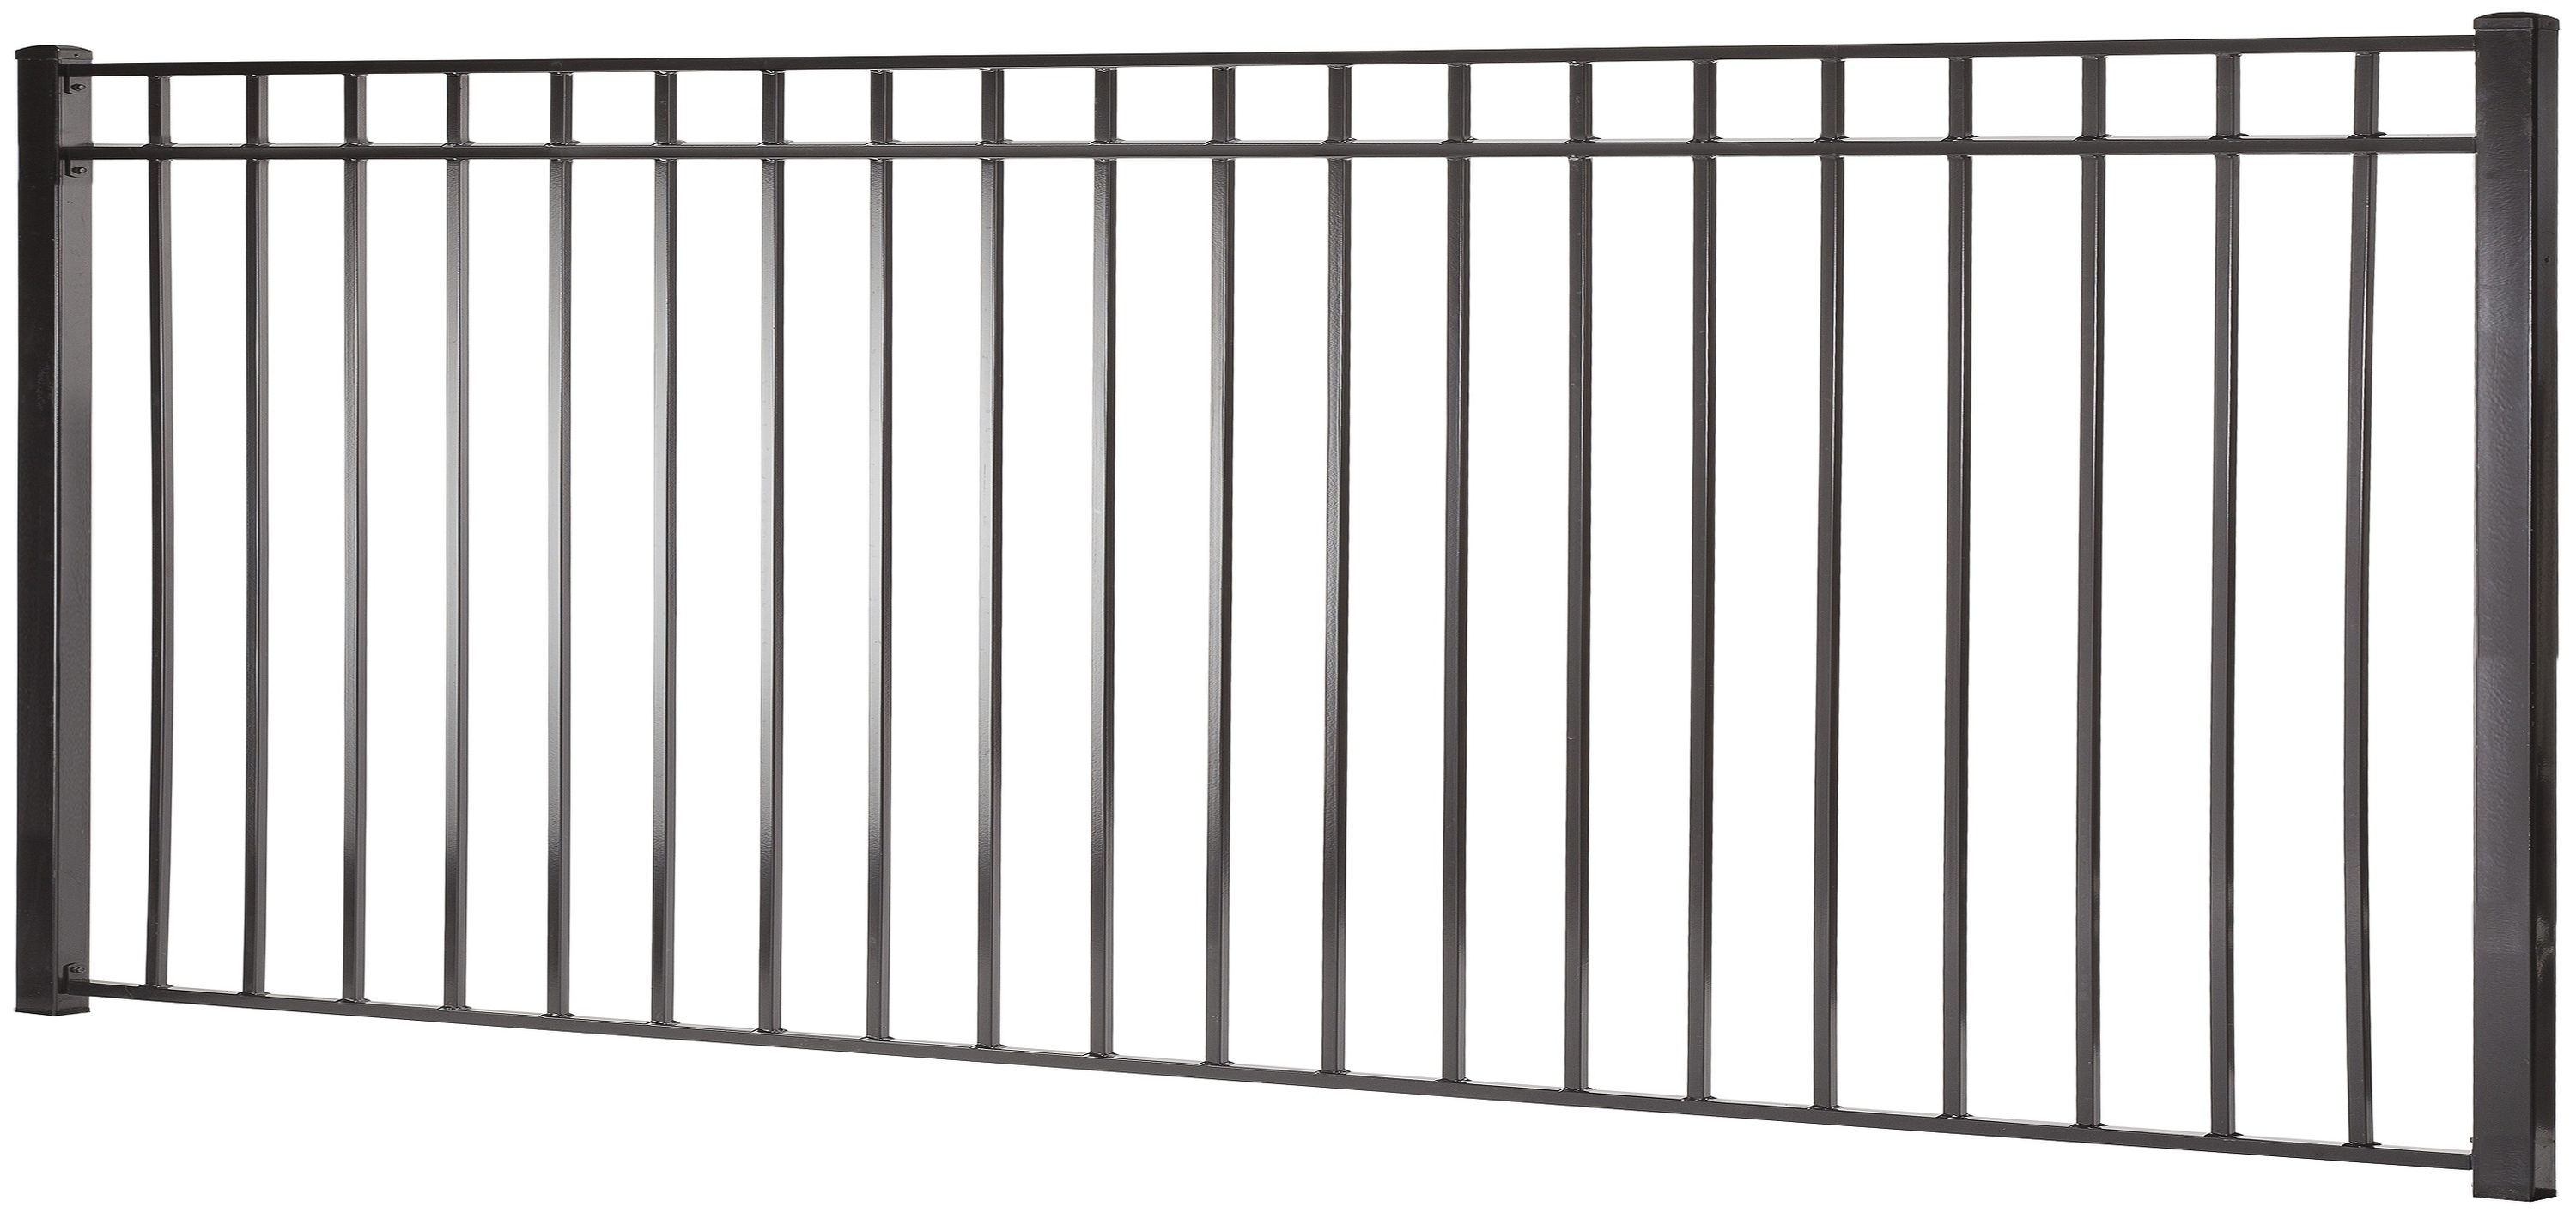 Monroe 4-ft H x 8-ft W Black Steel Decorative Fence Panel in the Metal ...